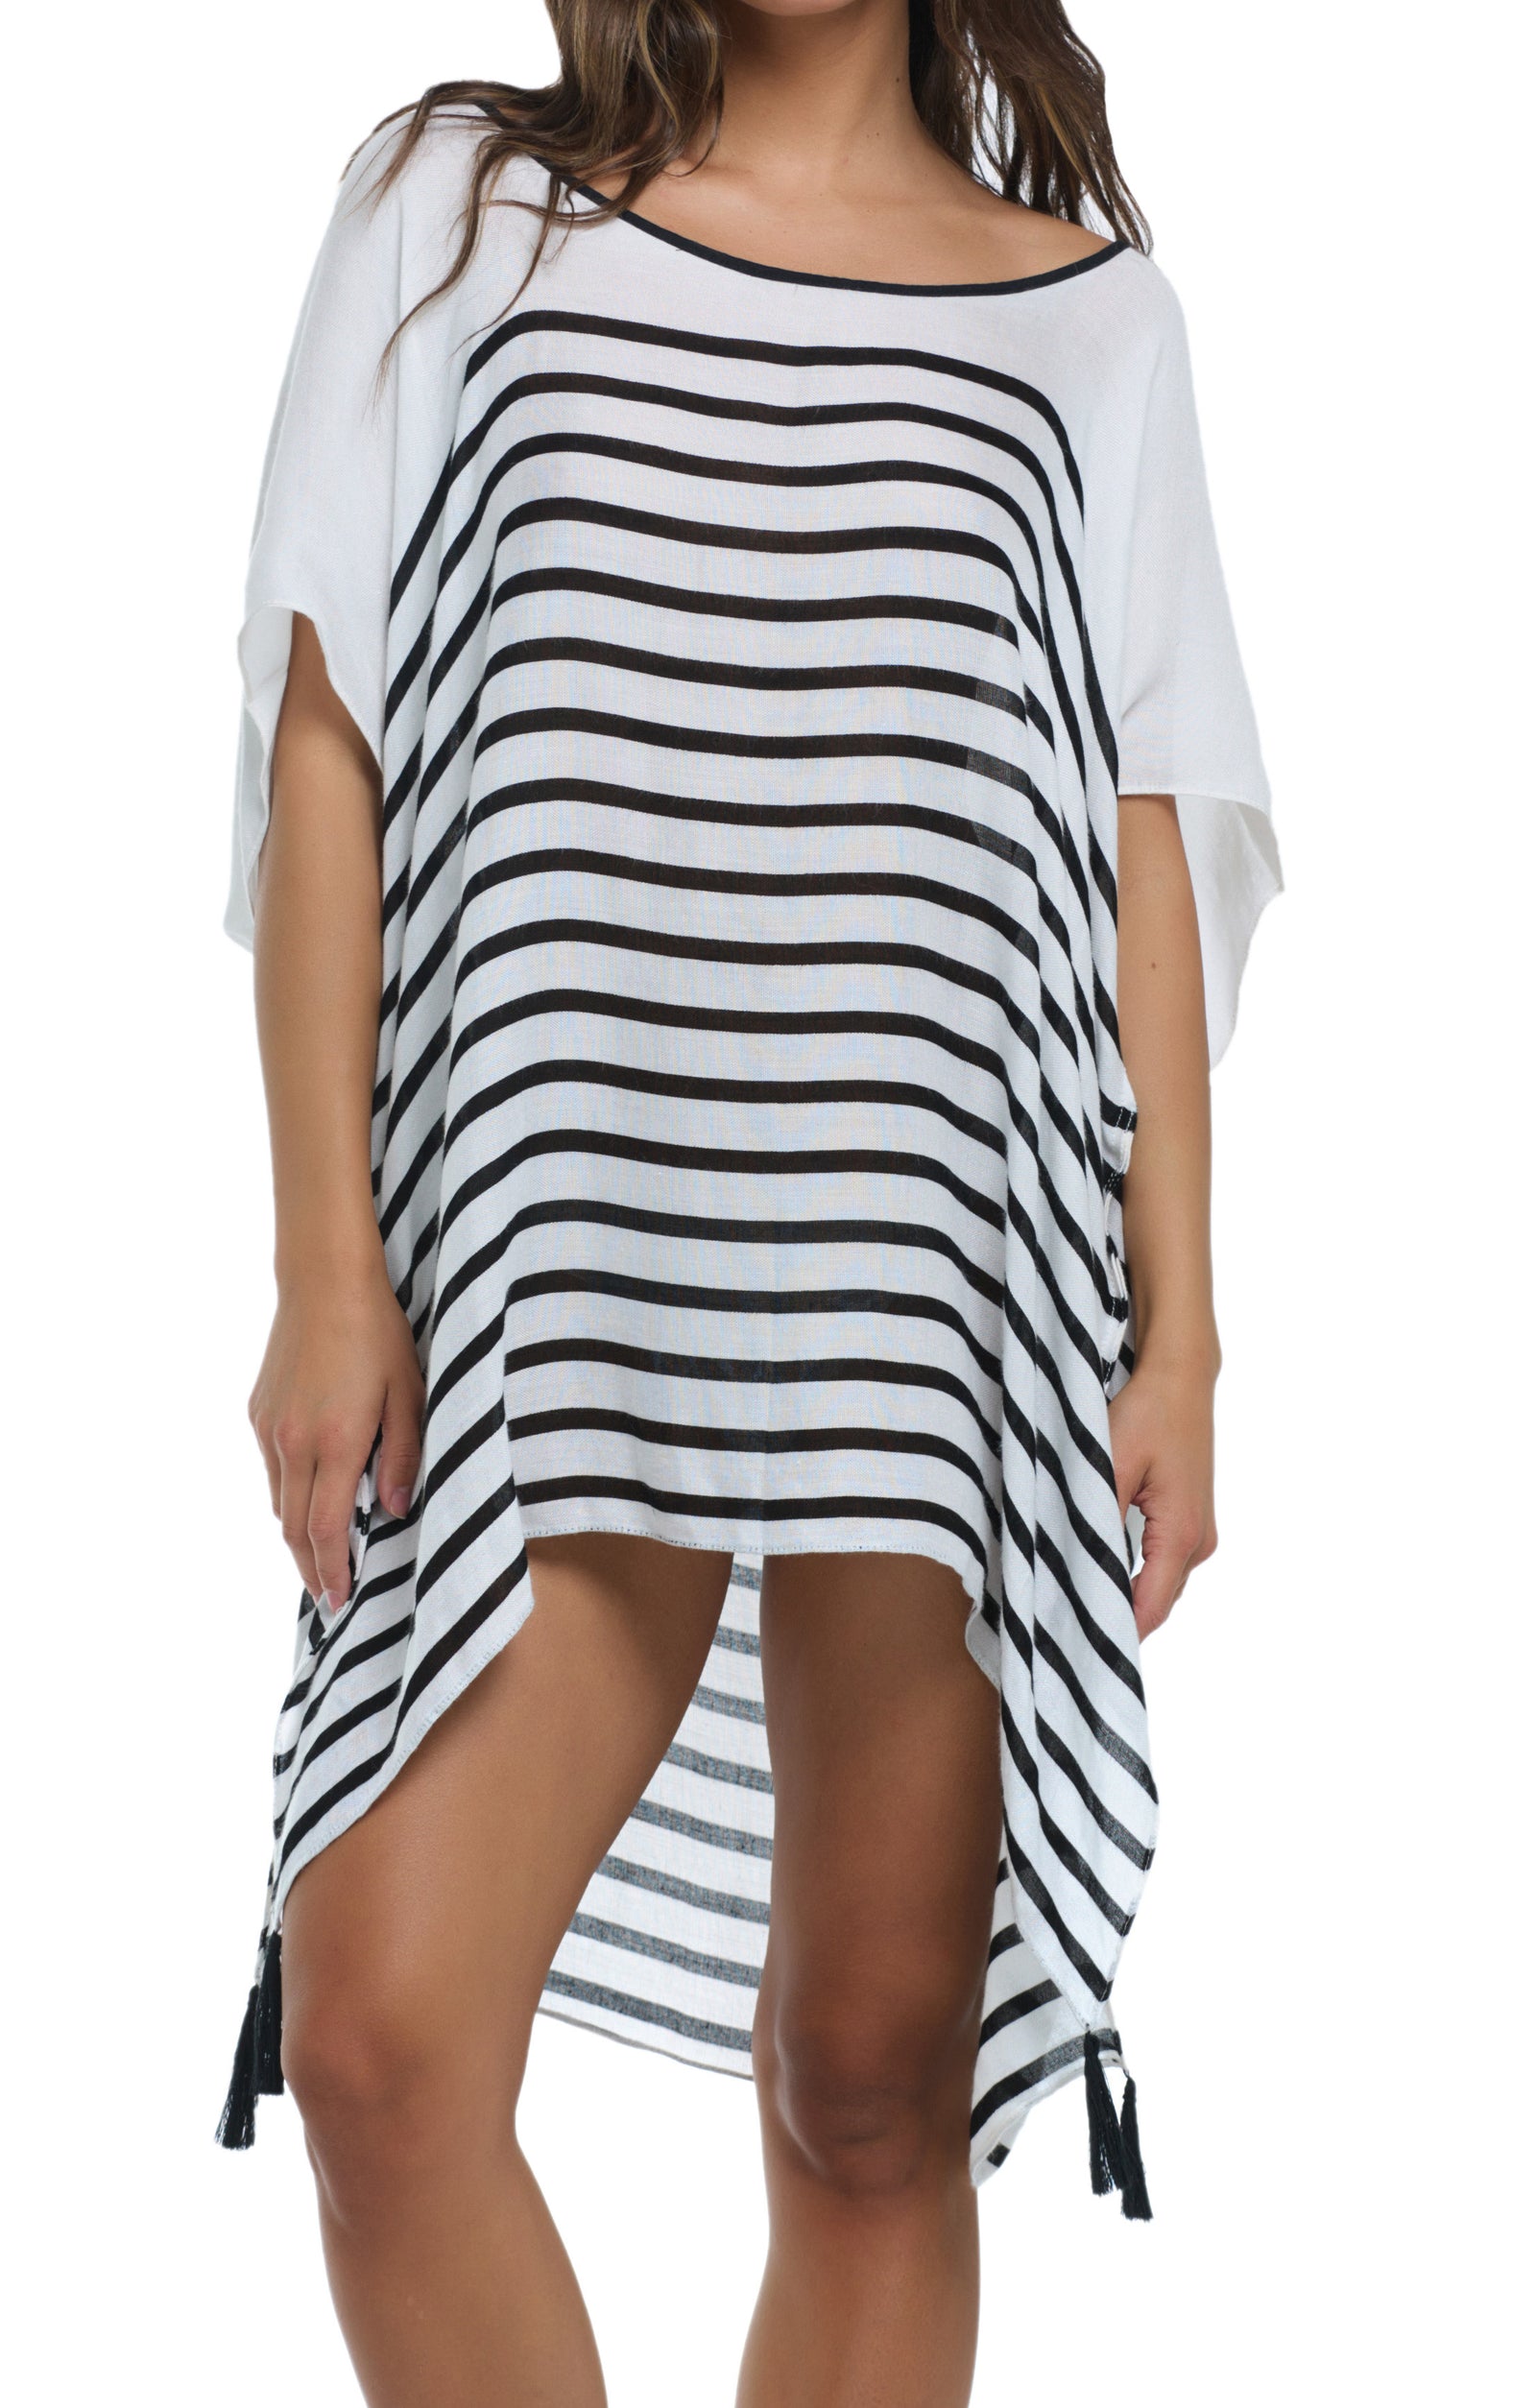 AJANA COLLECTION: COVERUPS  Loose Dress 1-Size  Rayon Material, Scoop Neck, Nautical Stripe, Mid Thigh Length   Product#: 39-456622